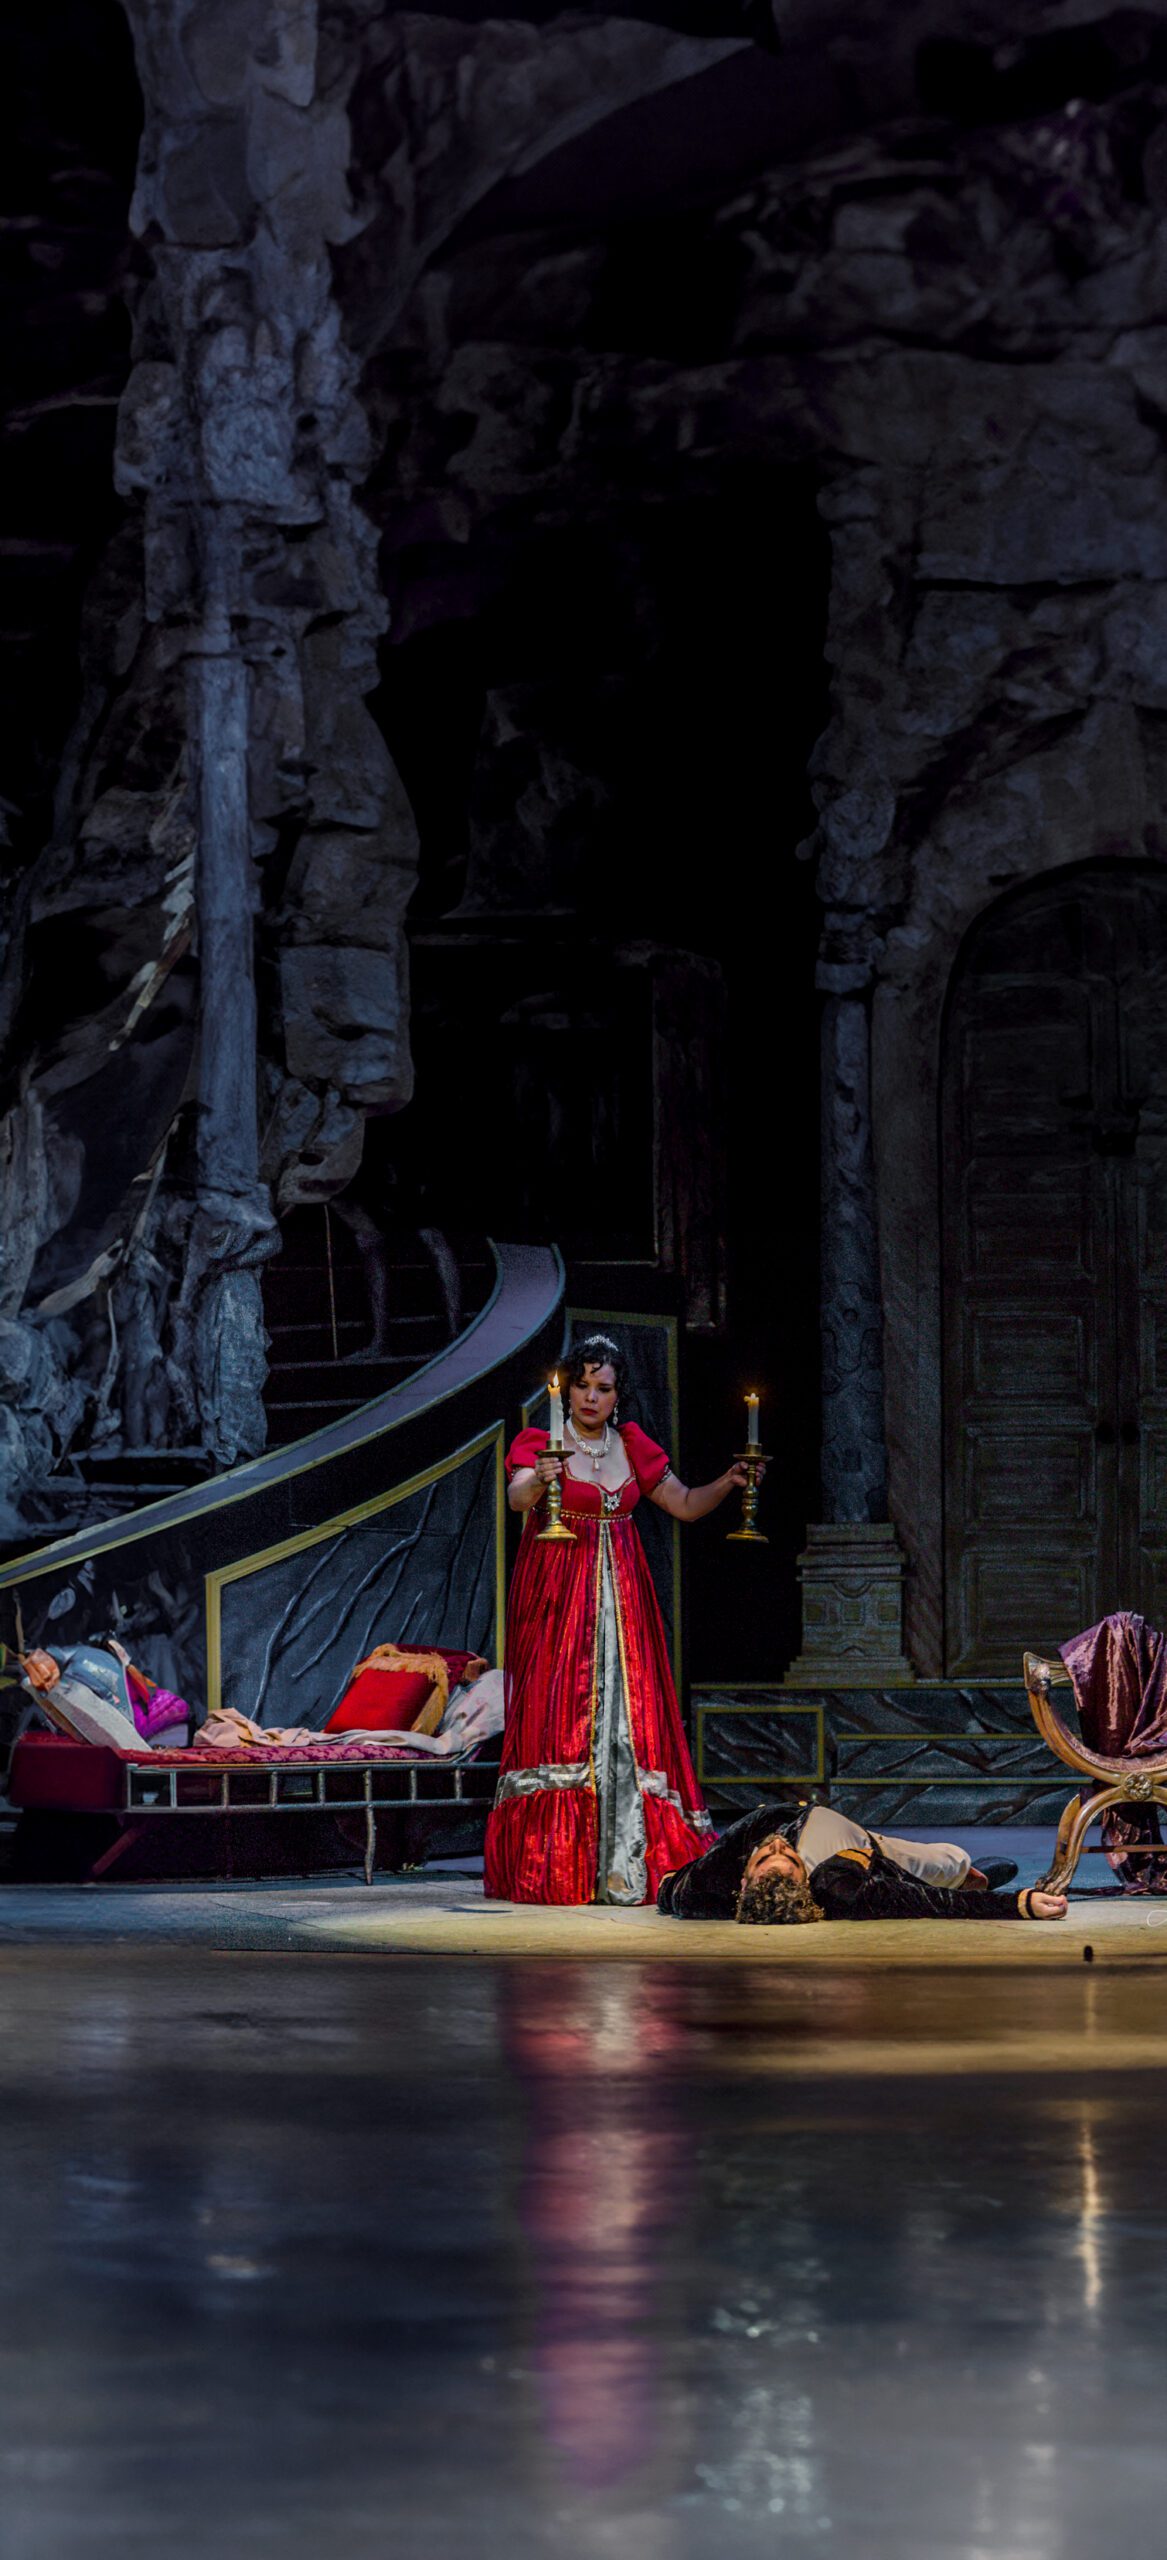 Tosca, from Puccini's opera, holds a pair of burning candles over the dead body of Scarpia in a stage production.